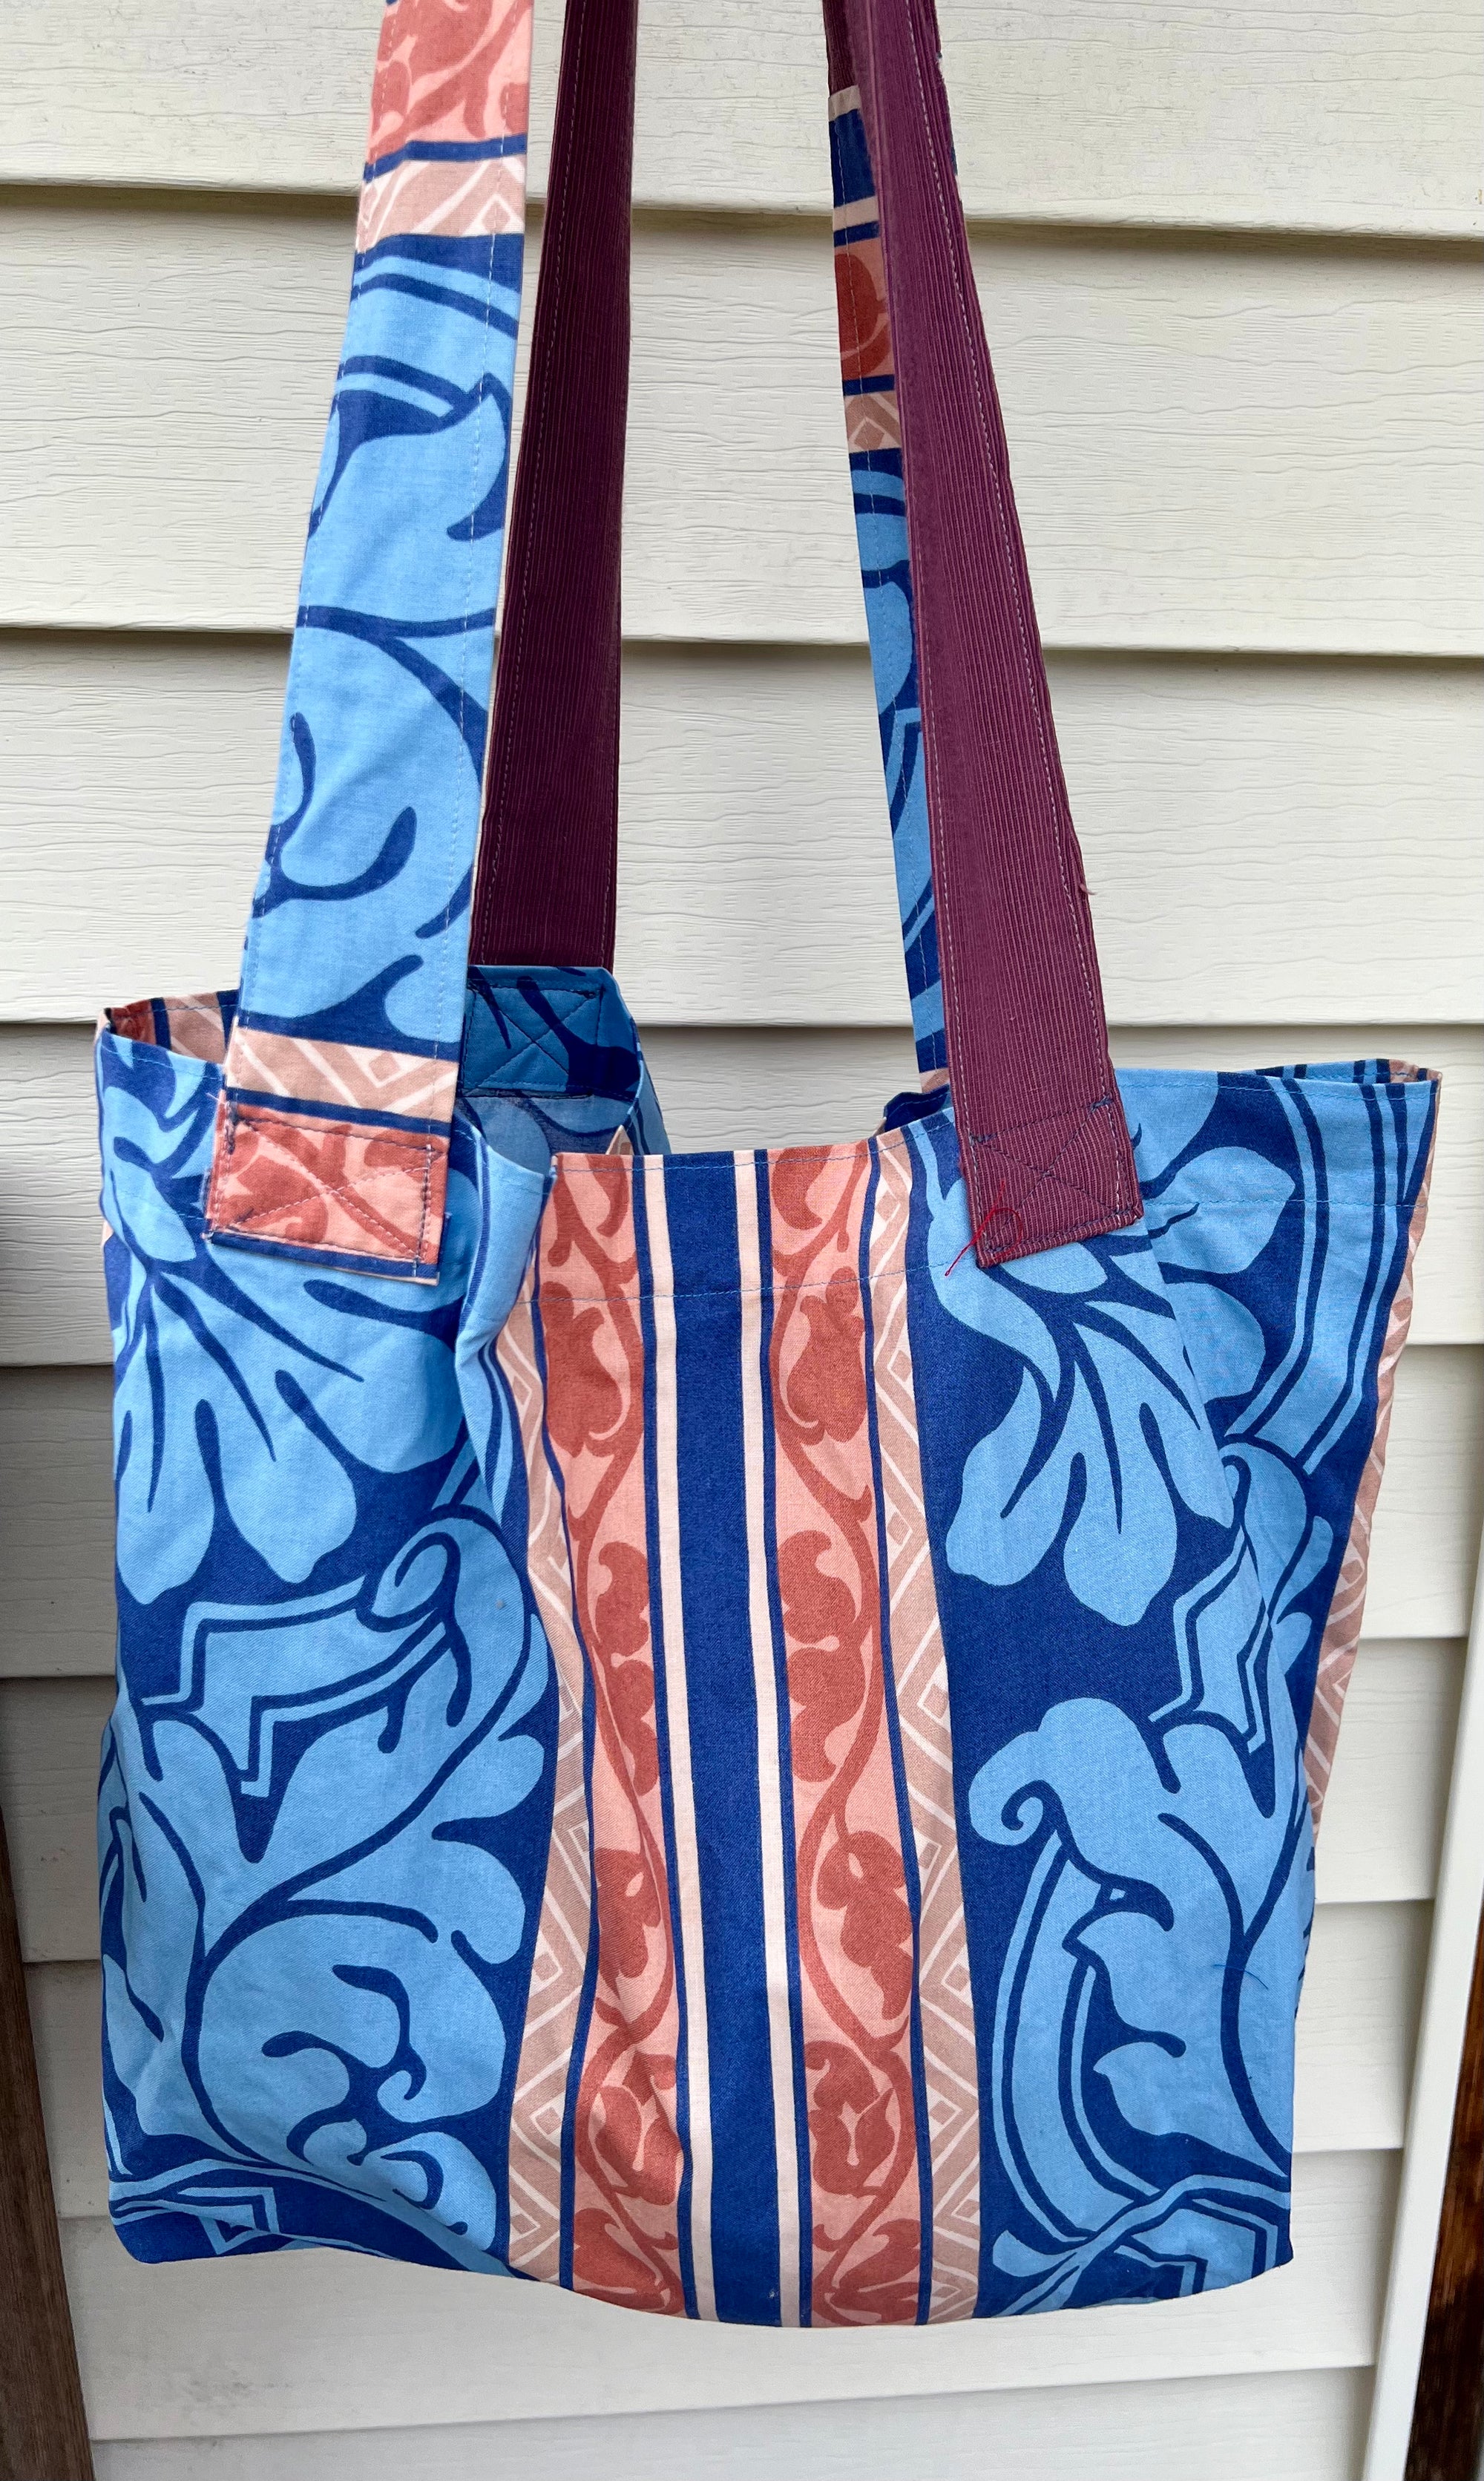 Market Grocery Tote Bag Blue Peach Large Print Damask